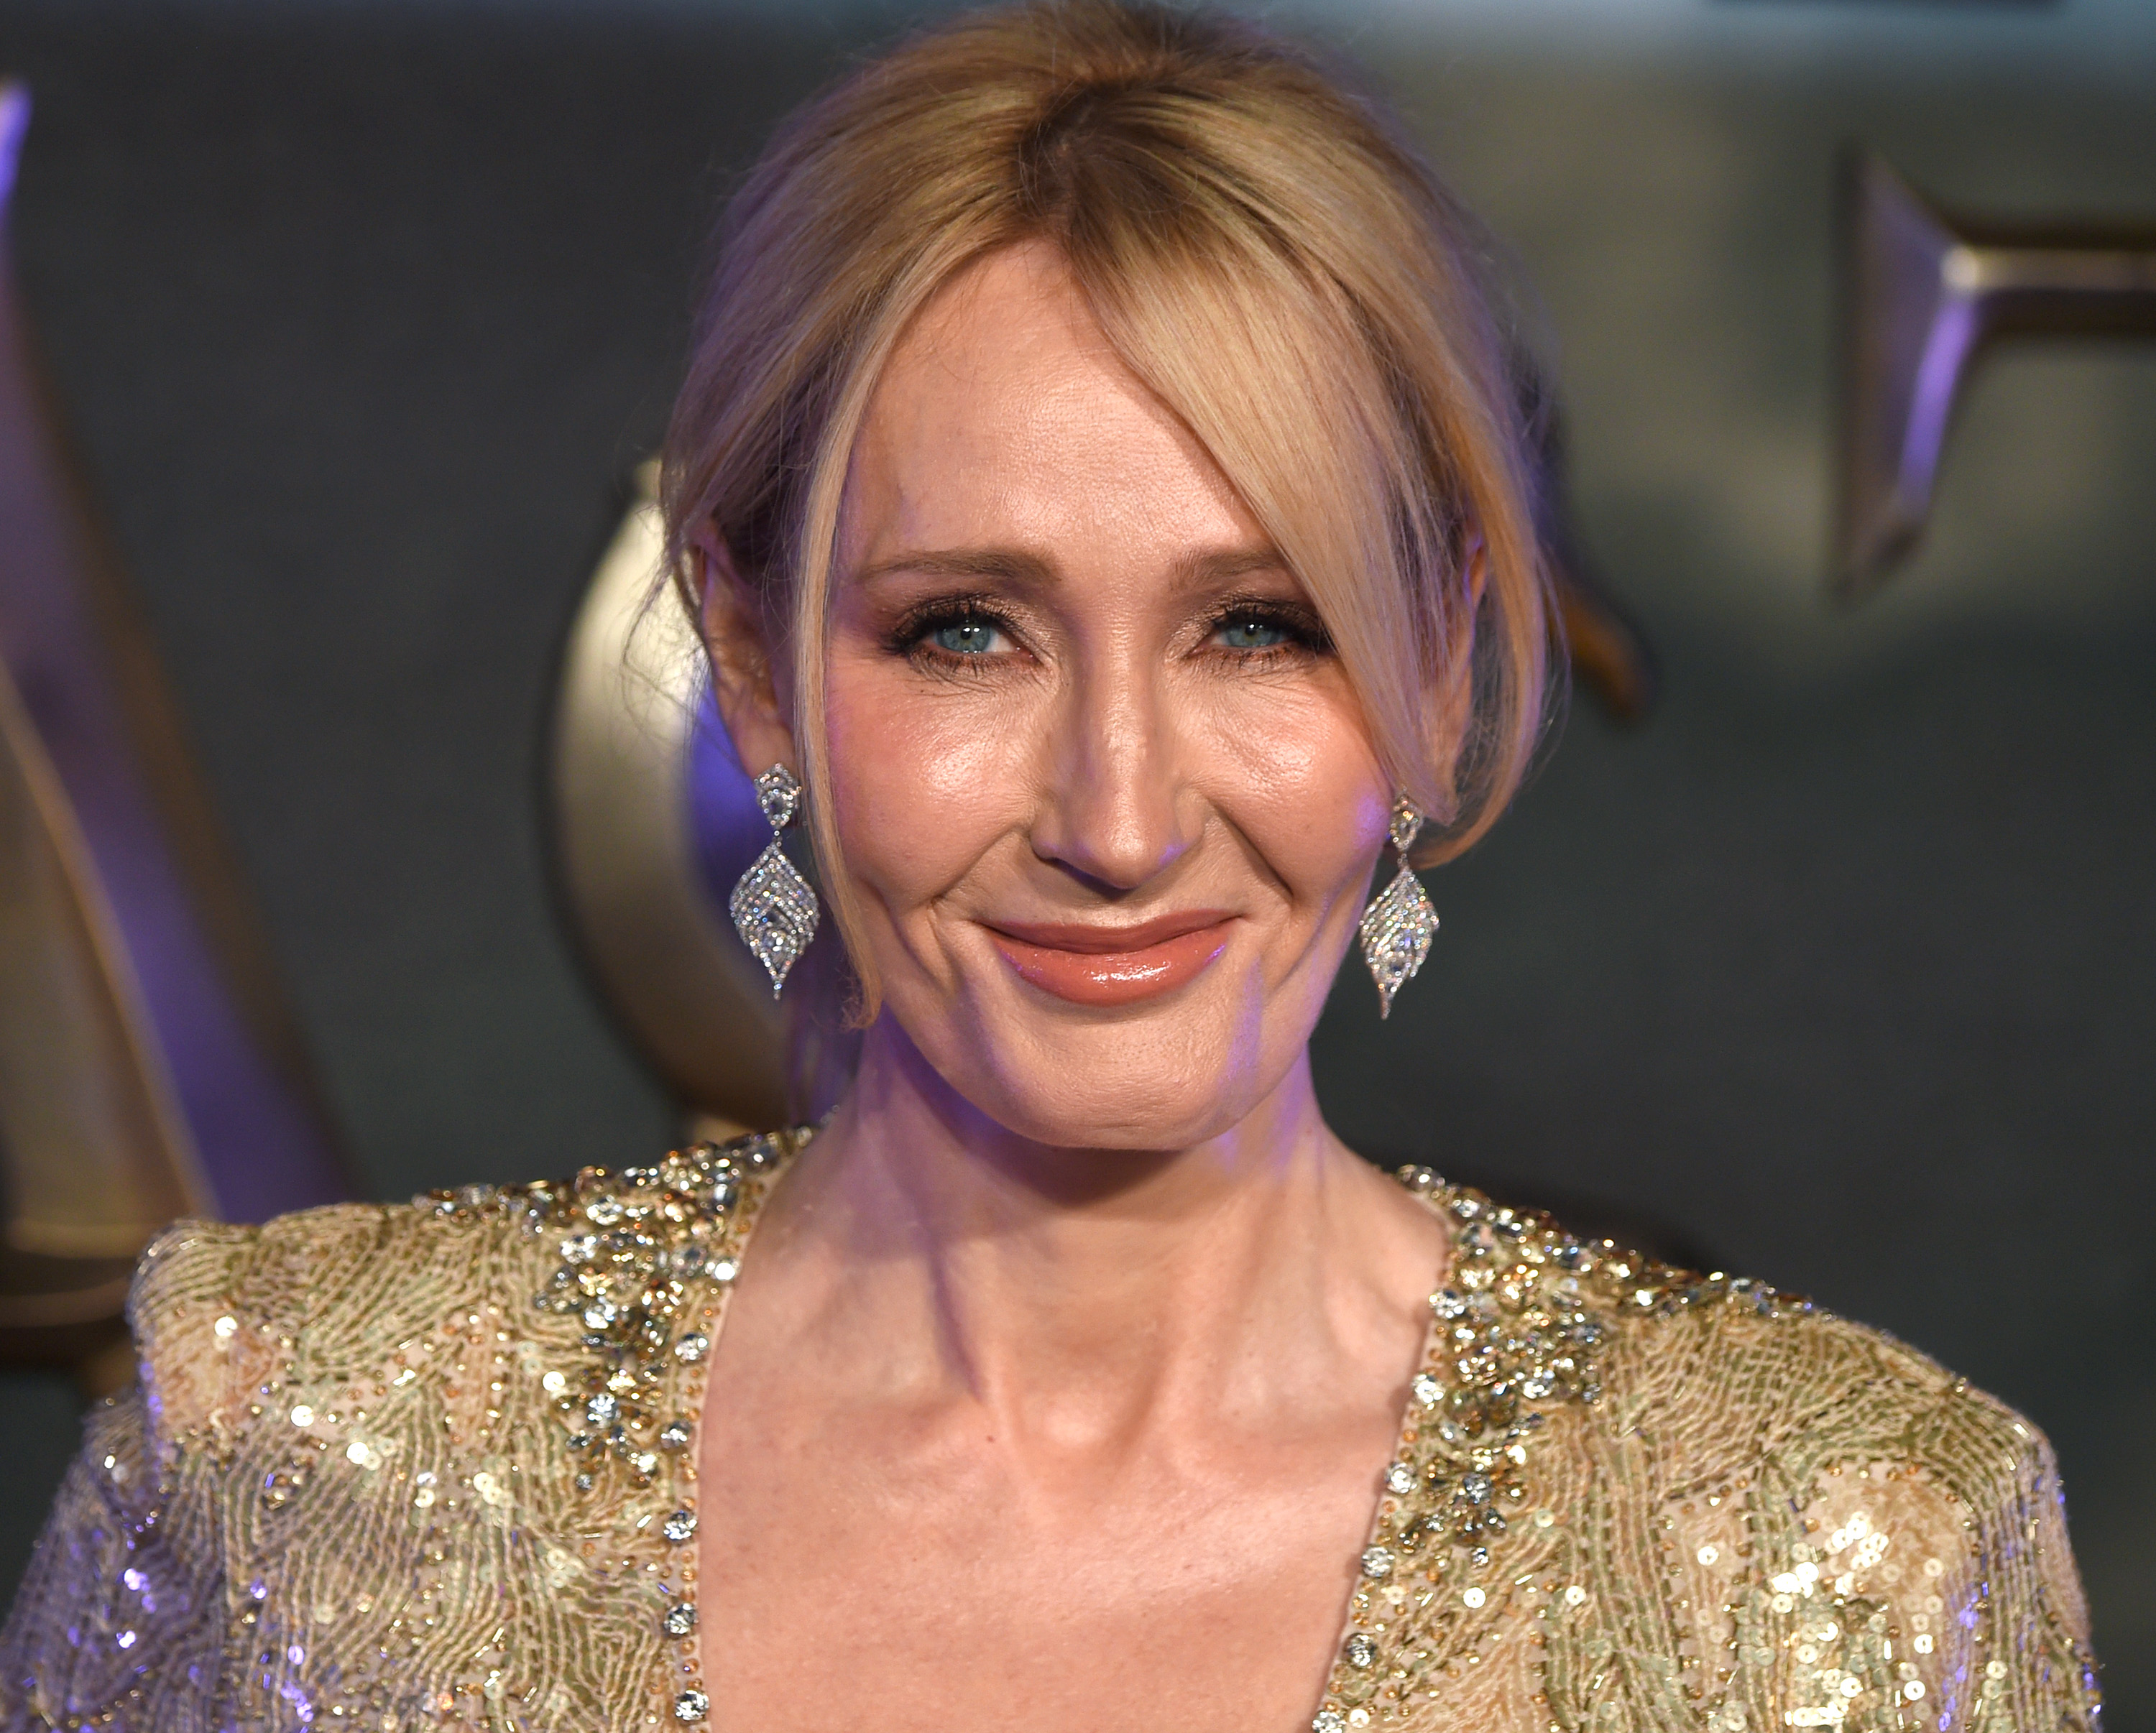 J.K. Rowling attends the European premiere of "Fantastic Beasts And Where To Find Them" at Odeon Leicester Square on November 15, 2016 in London, England. (Photo by Anthony Harvey—Getty Images)